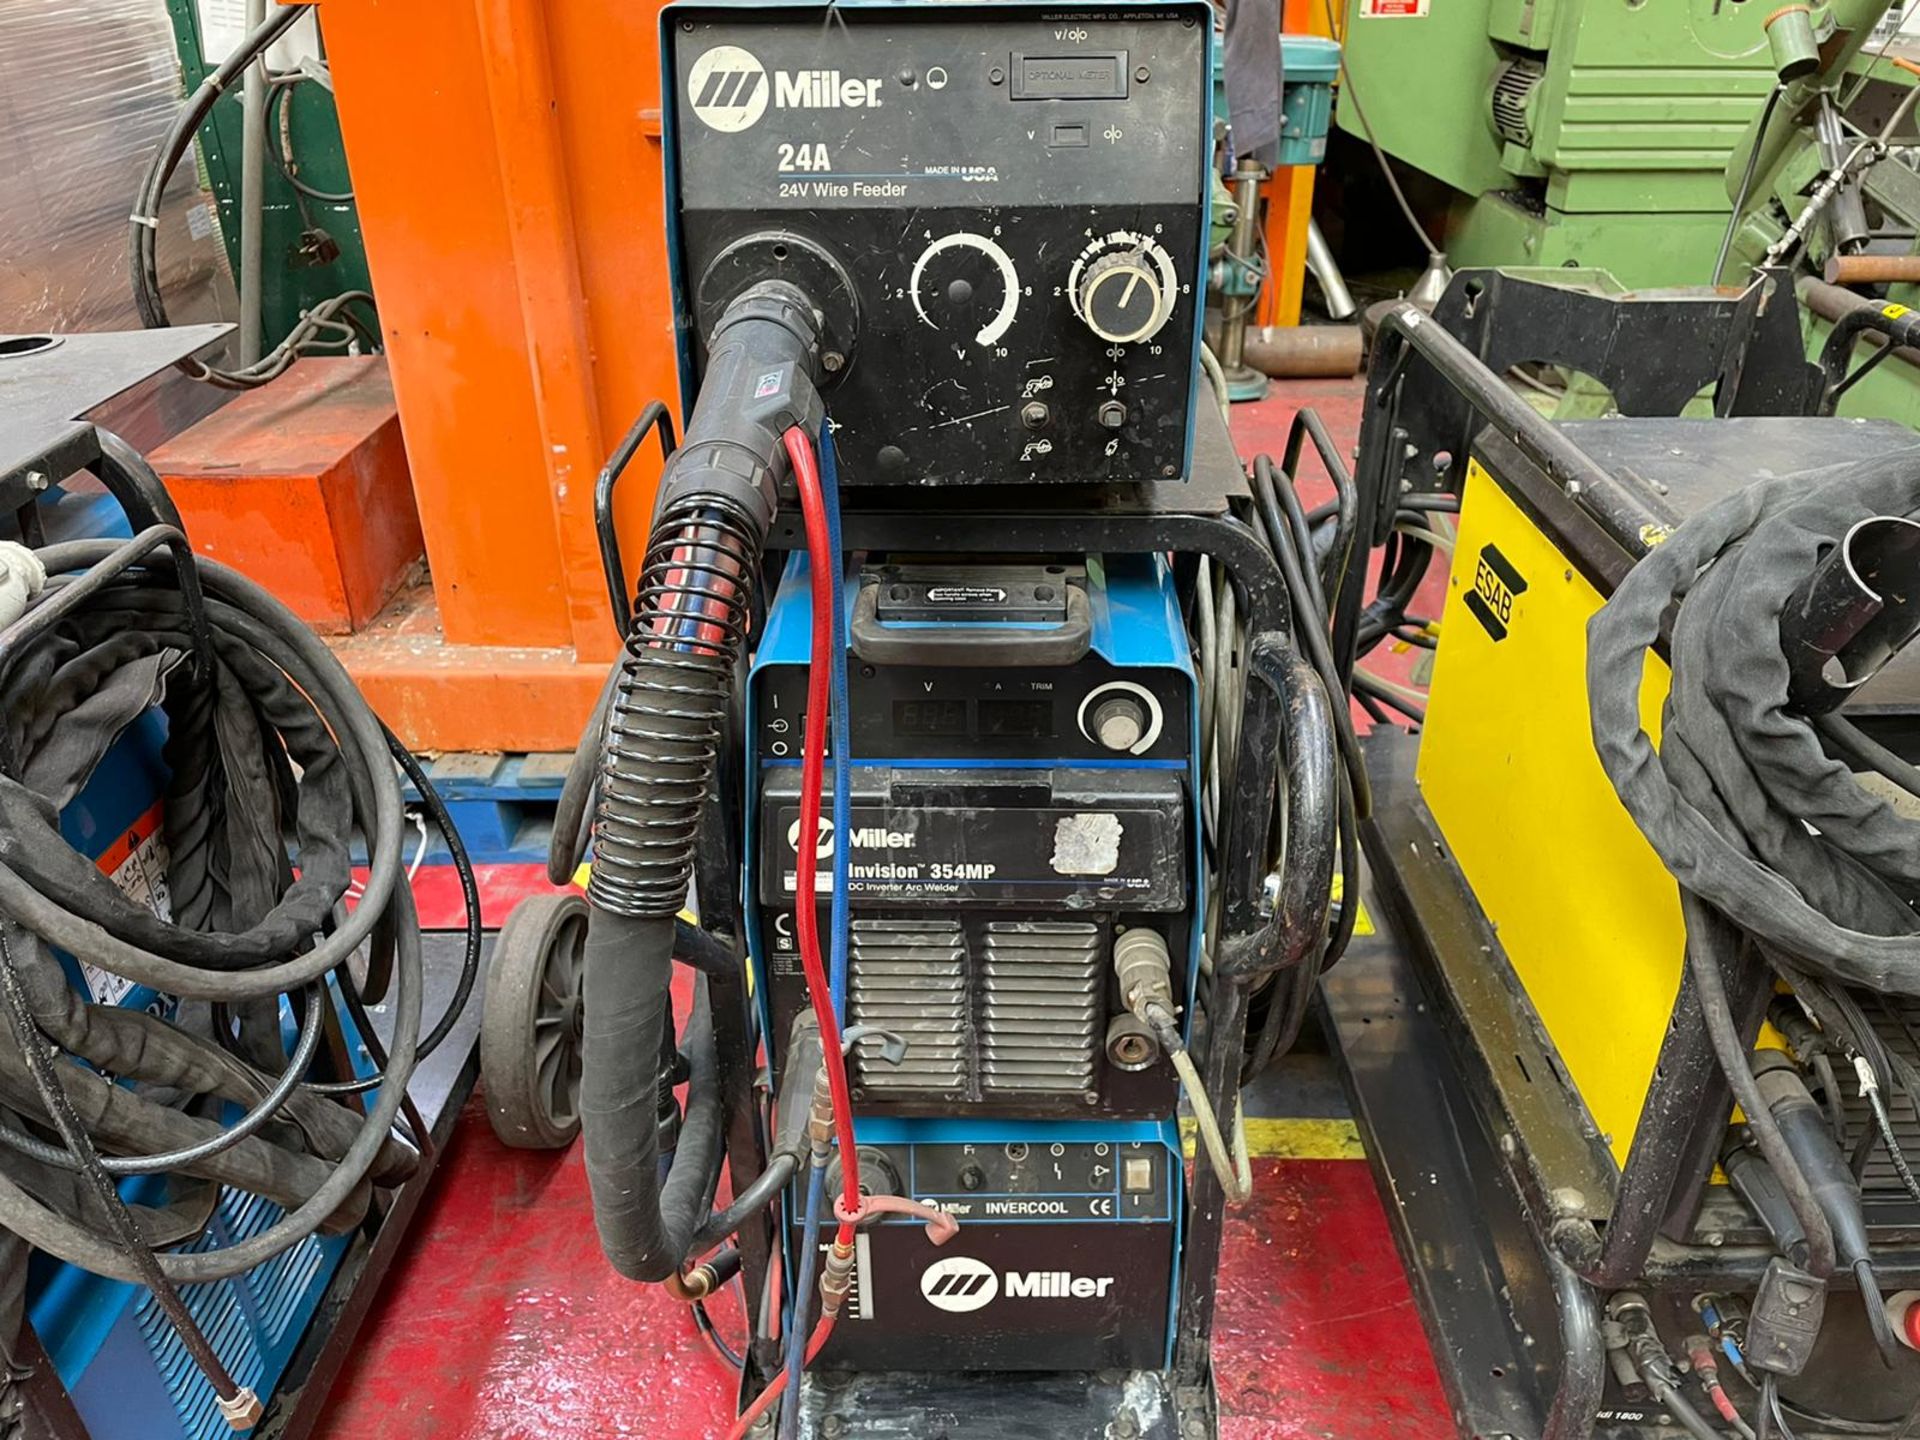 Miller Inivision 354 MP Arc Welder with Equipment